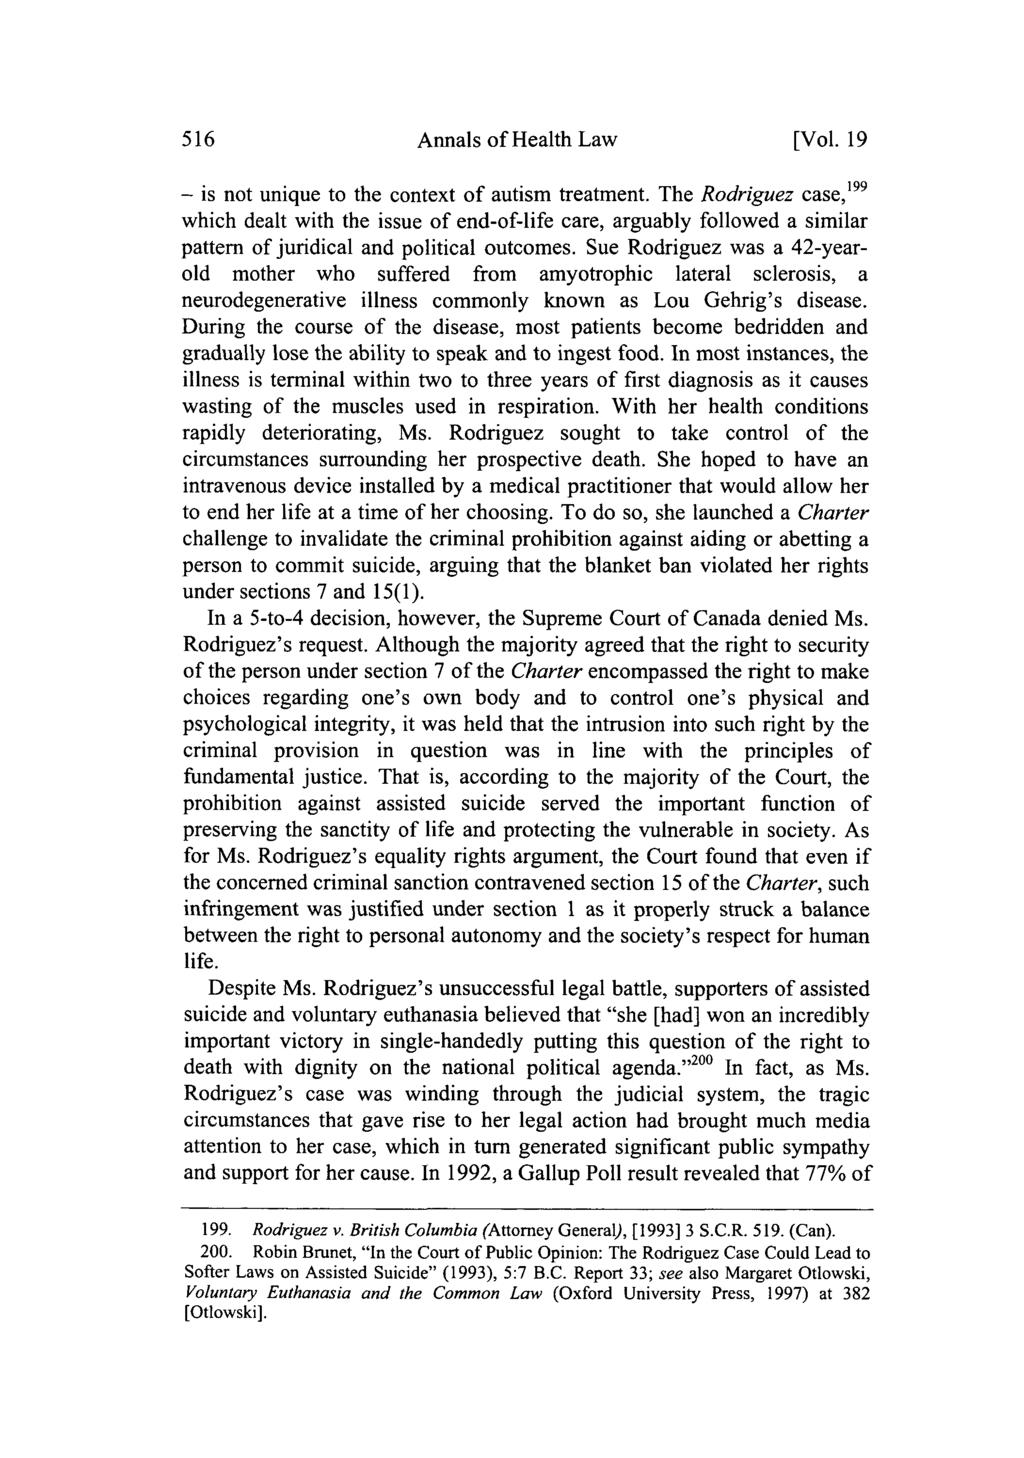 Annals of Health Law, Vol. 19 [2010], Iss. 3, Art. 5 Annals of Health Law [Vol. 19 - is not unique to the context of autism treatment.